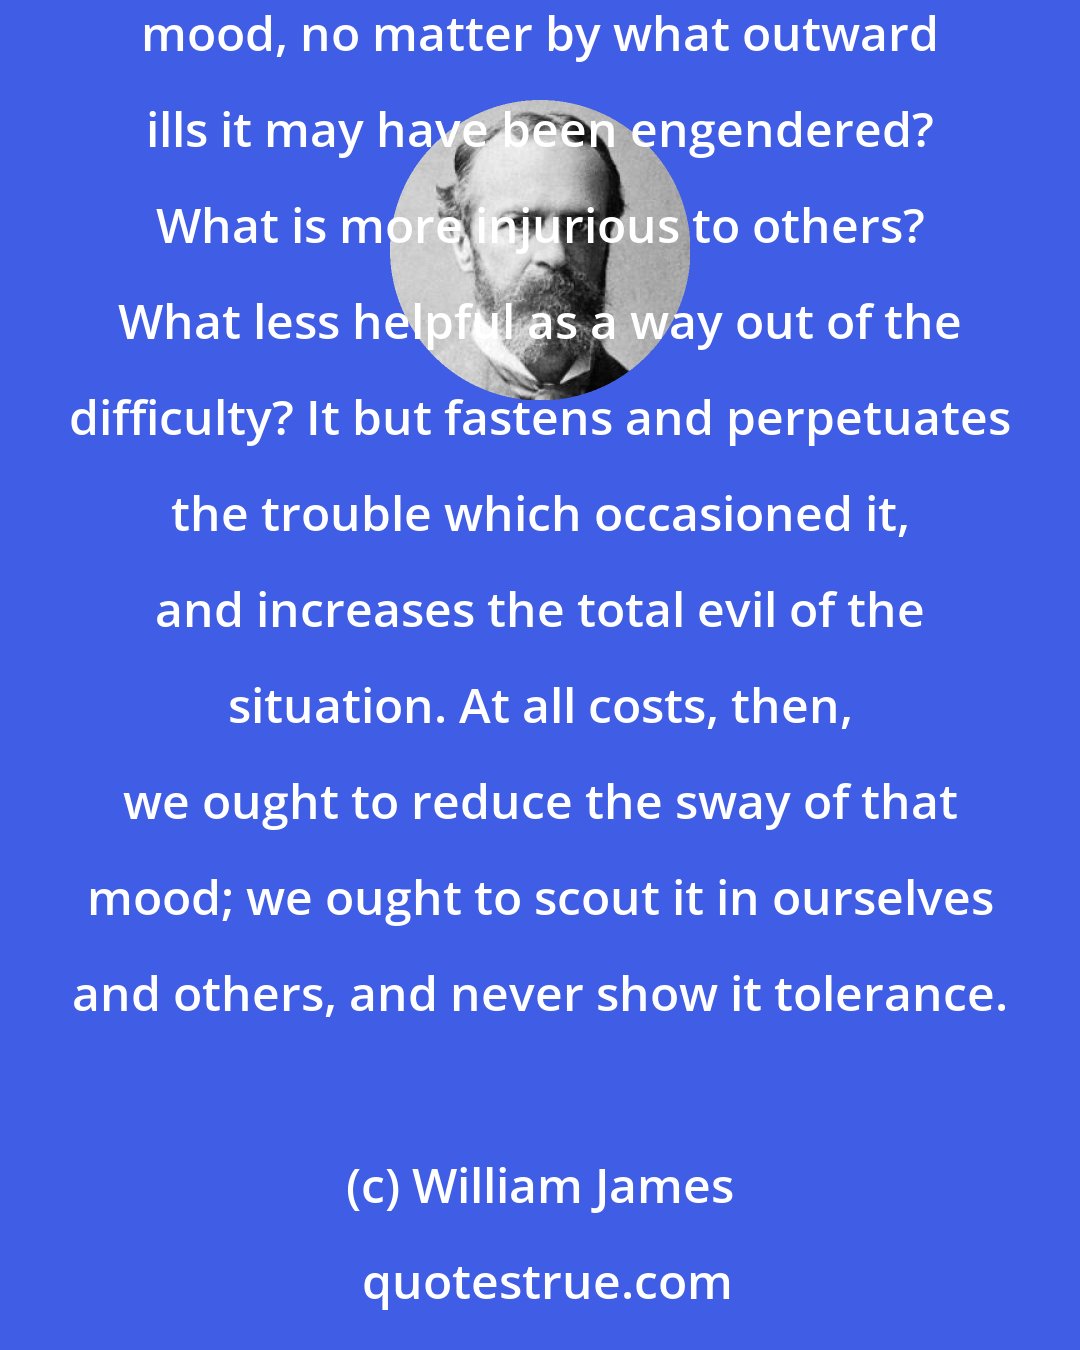 William James: The attitude of unhappiness is not only painful, it is mean and ugly. What can be more base and unworthy than the pining, puling, mumping mood, no matter by what outward ills it may have been engendered? What is more injurious to others? What less helpful as a way out of the difficulty? It but fastens and perpetuates the trouble which occasioned it, and increases the total evil of the situation. At all costs, then, we ought to reduce the sway of that mood; we ought to scout it in ourselves and others, and never show it tolerance.